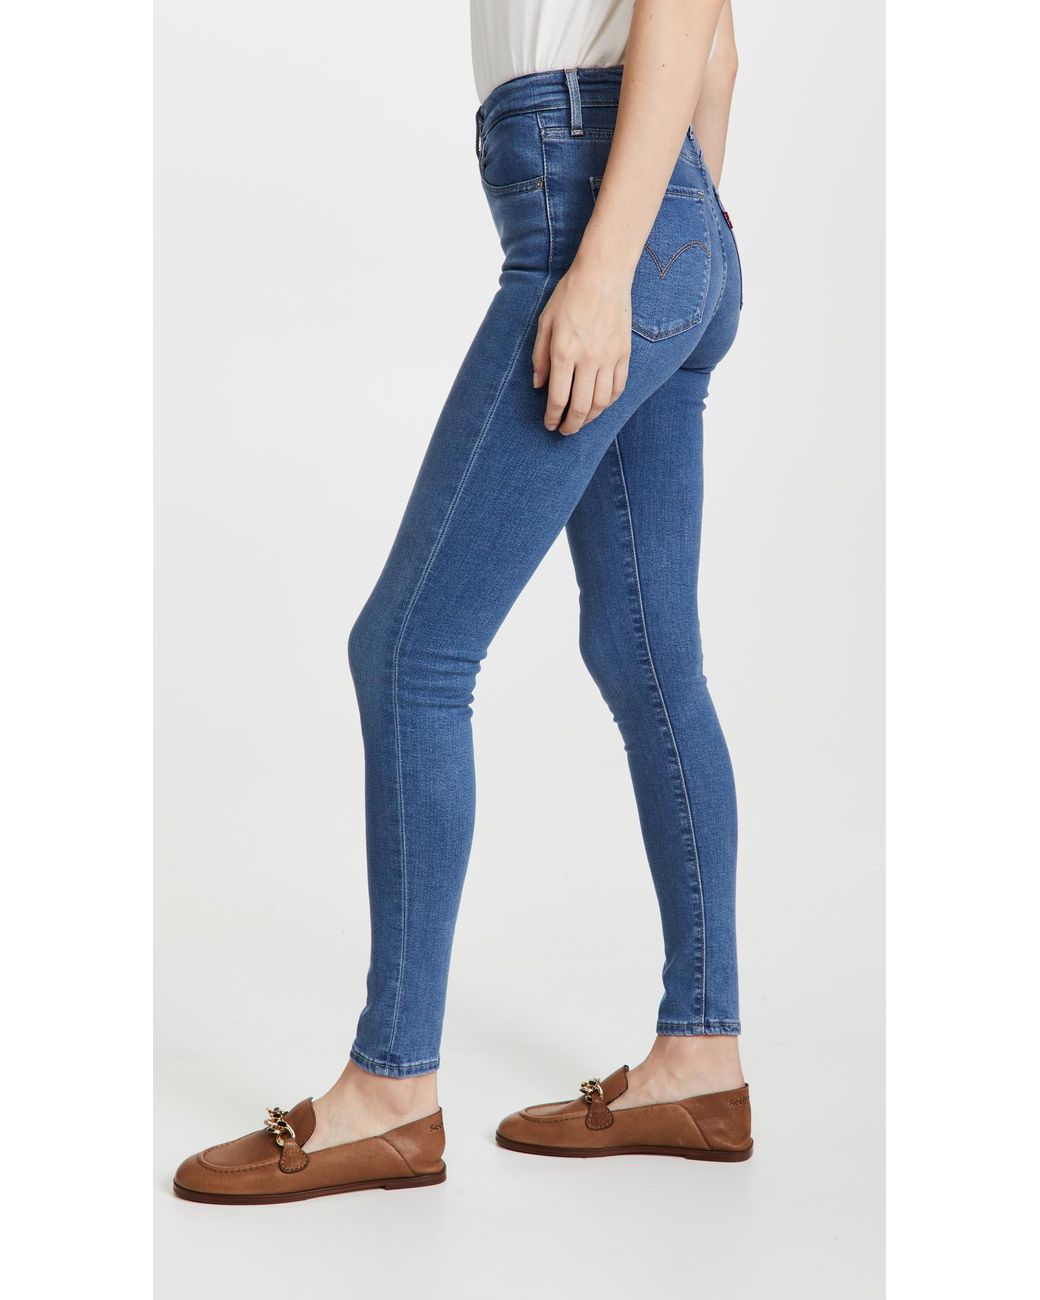 Levi's 721 Sculpt Hypersoft High Rise Skinny Jeans in Blue | Lyst